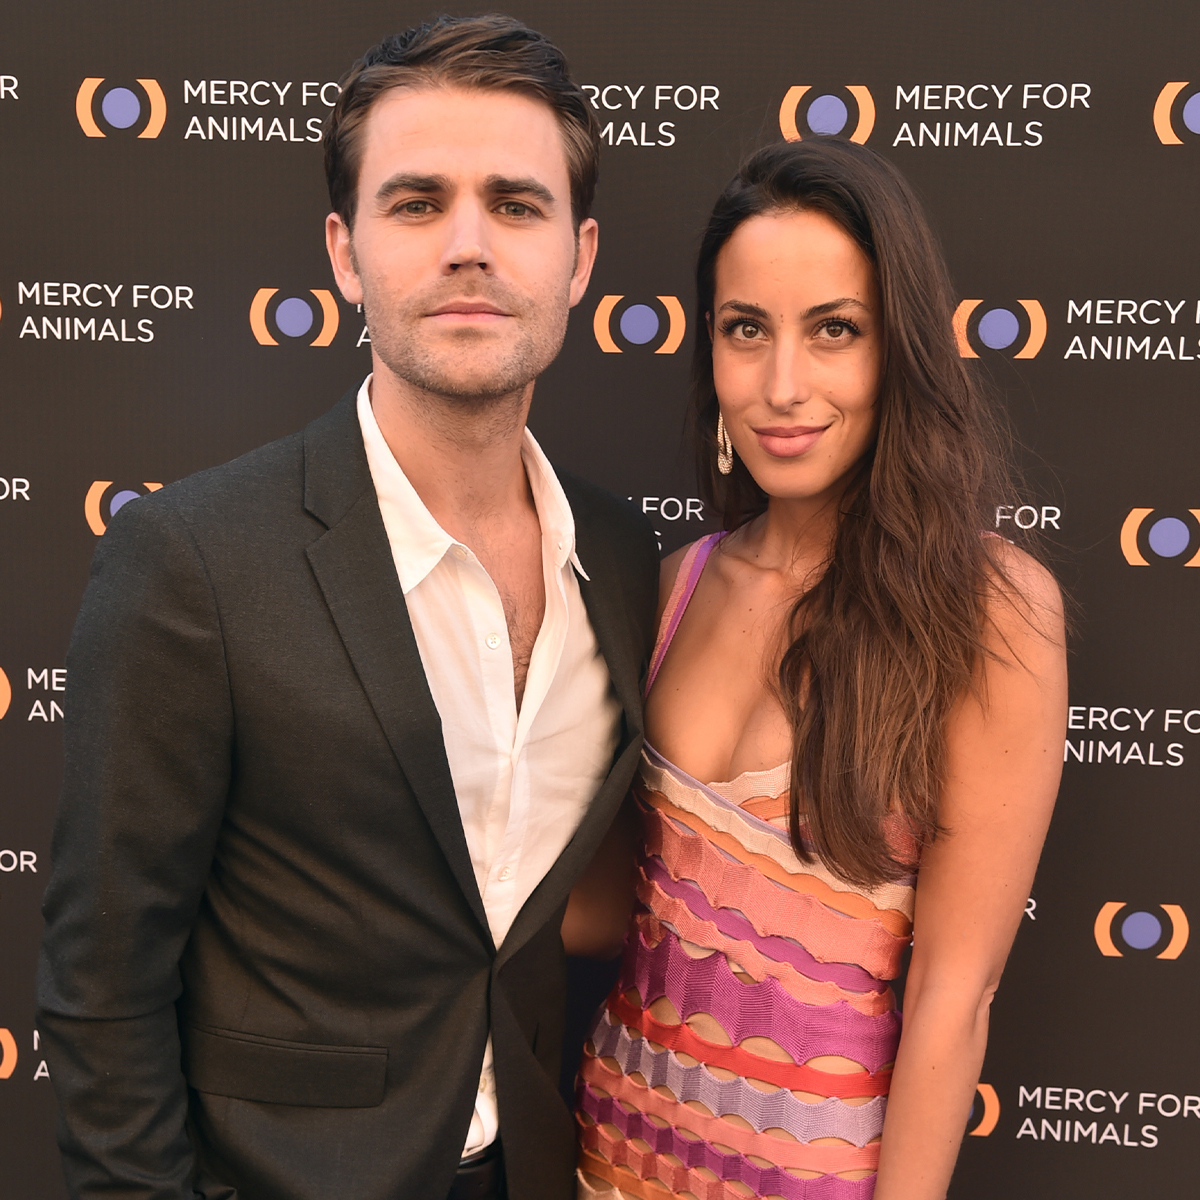 Paul Wesley News, Pictures, and Videos - E! Online